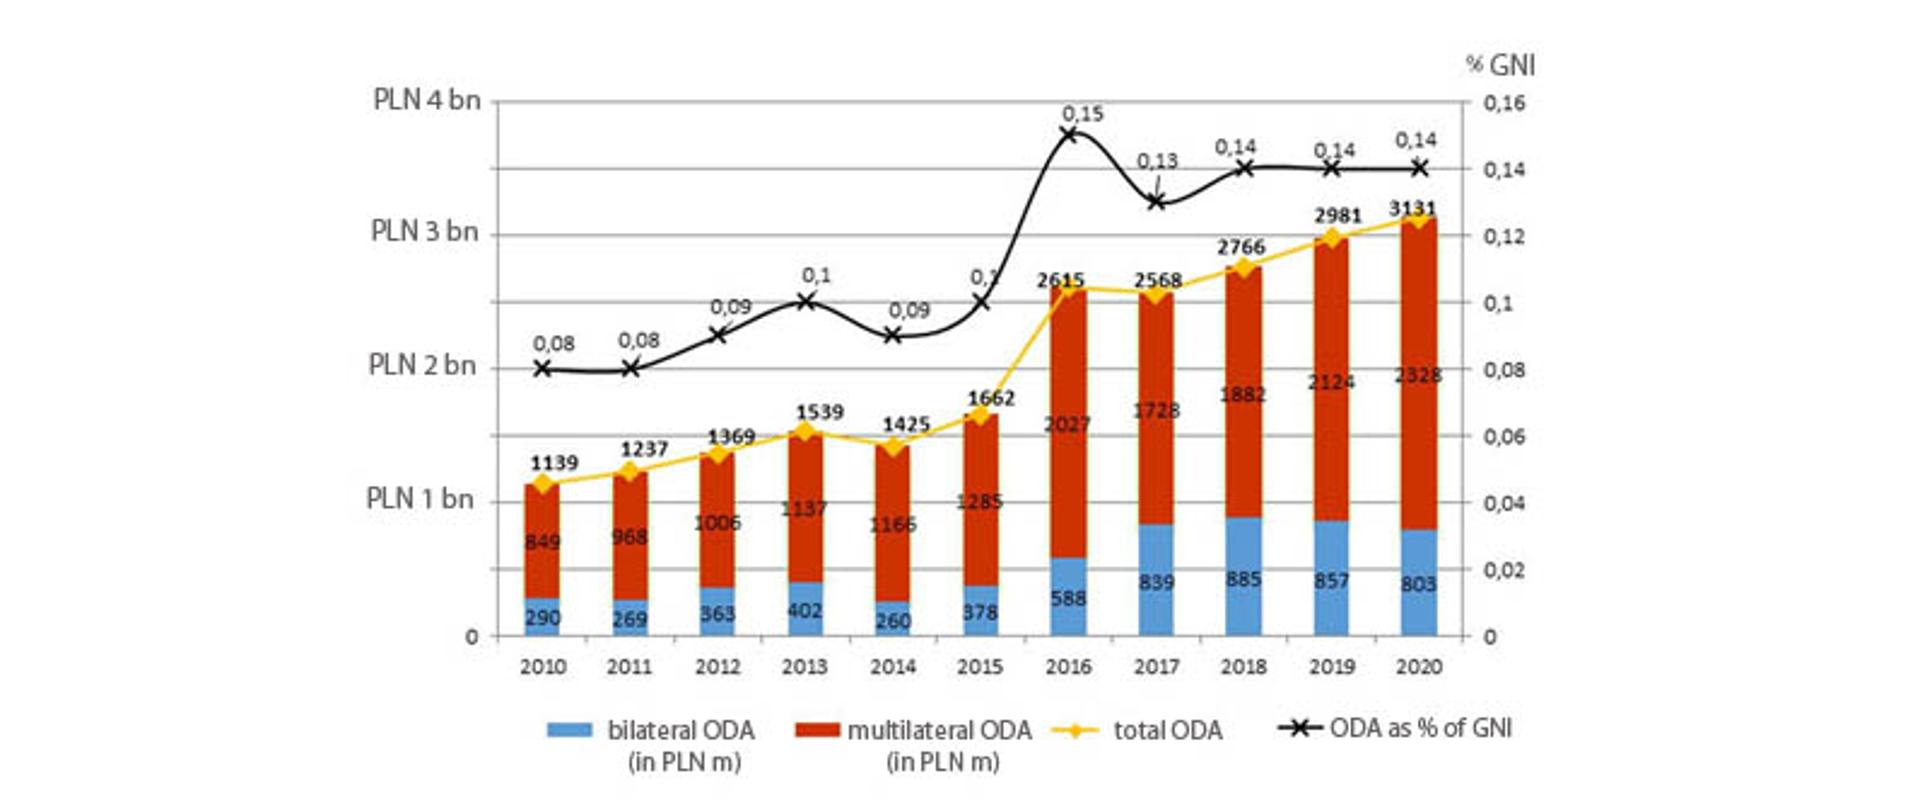 graph presenting different types of ODA in Poland between 2010 and 2020